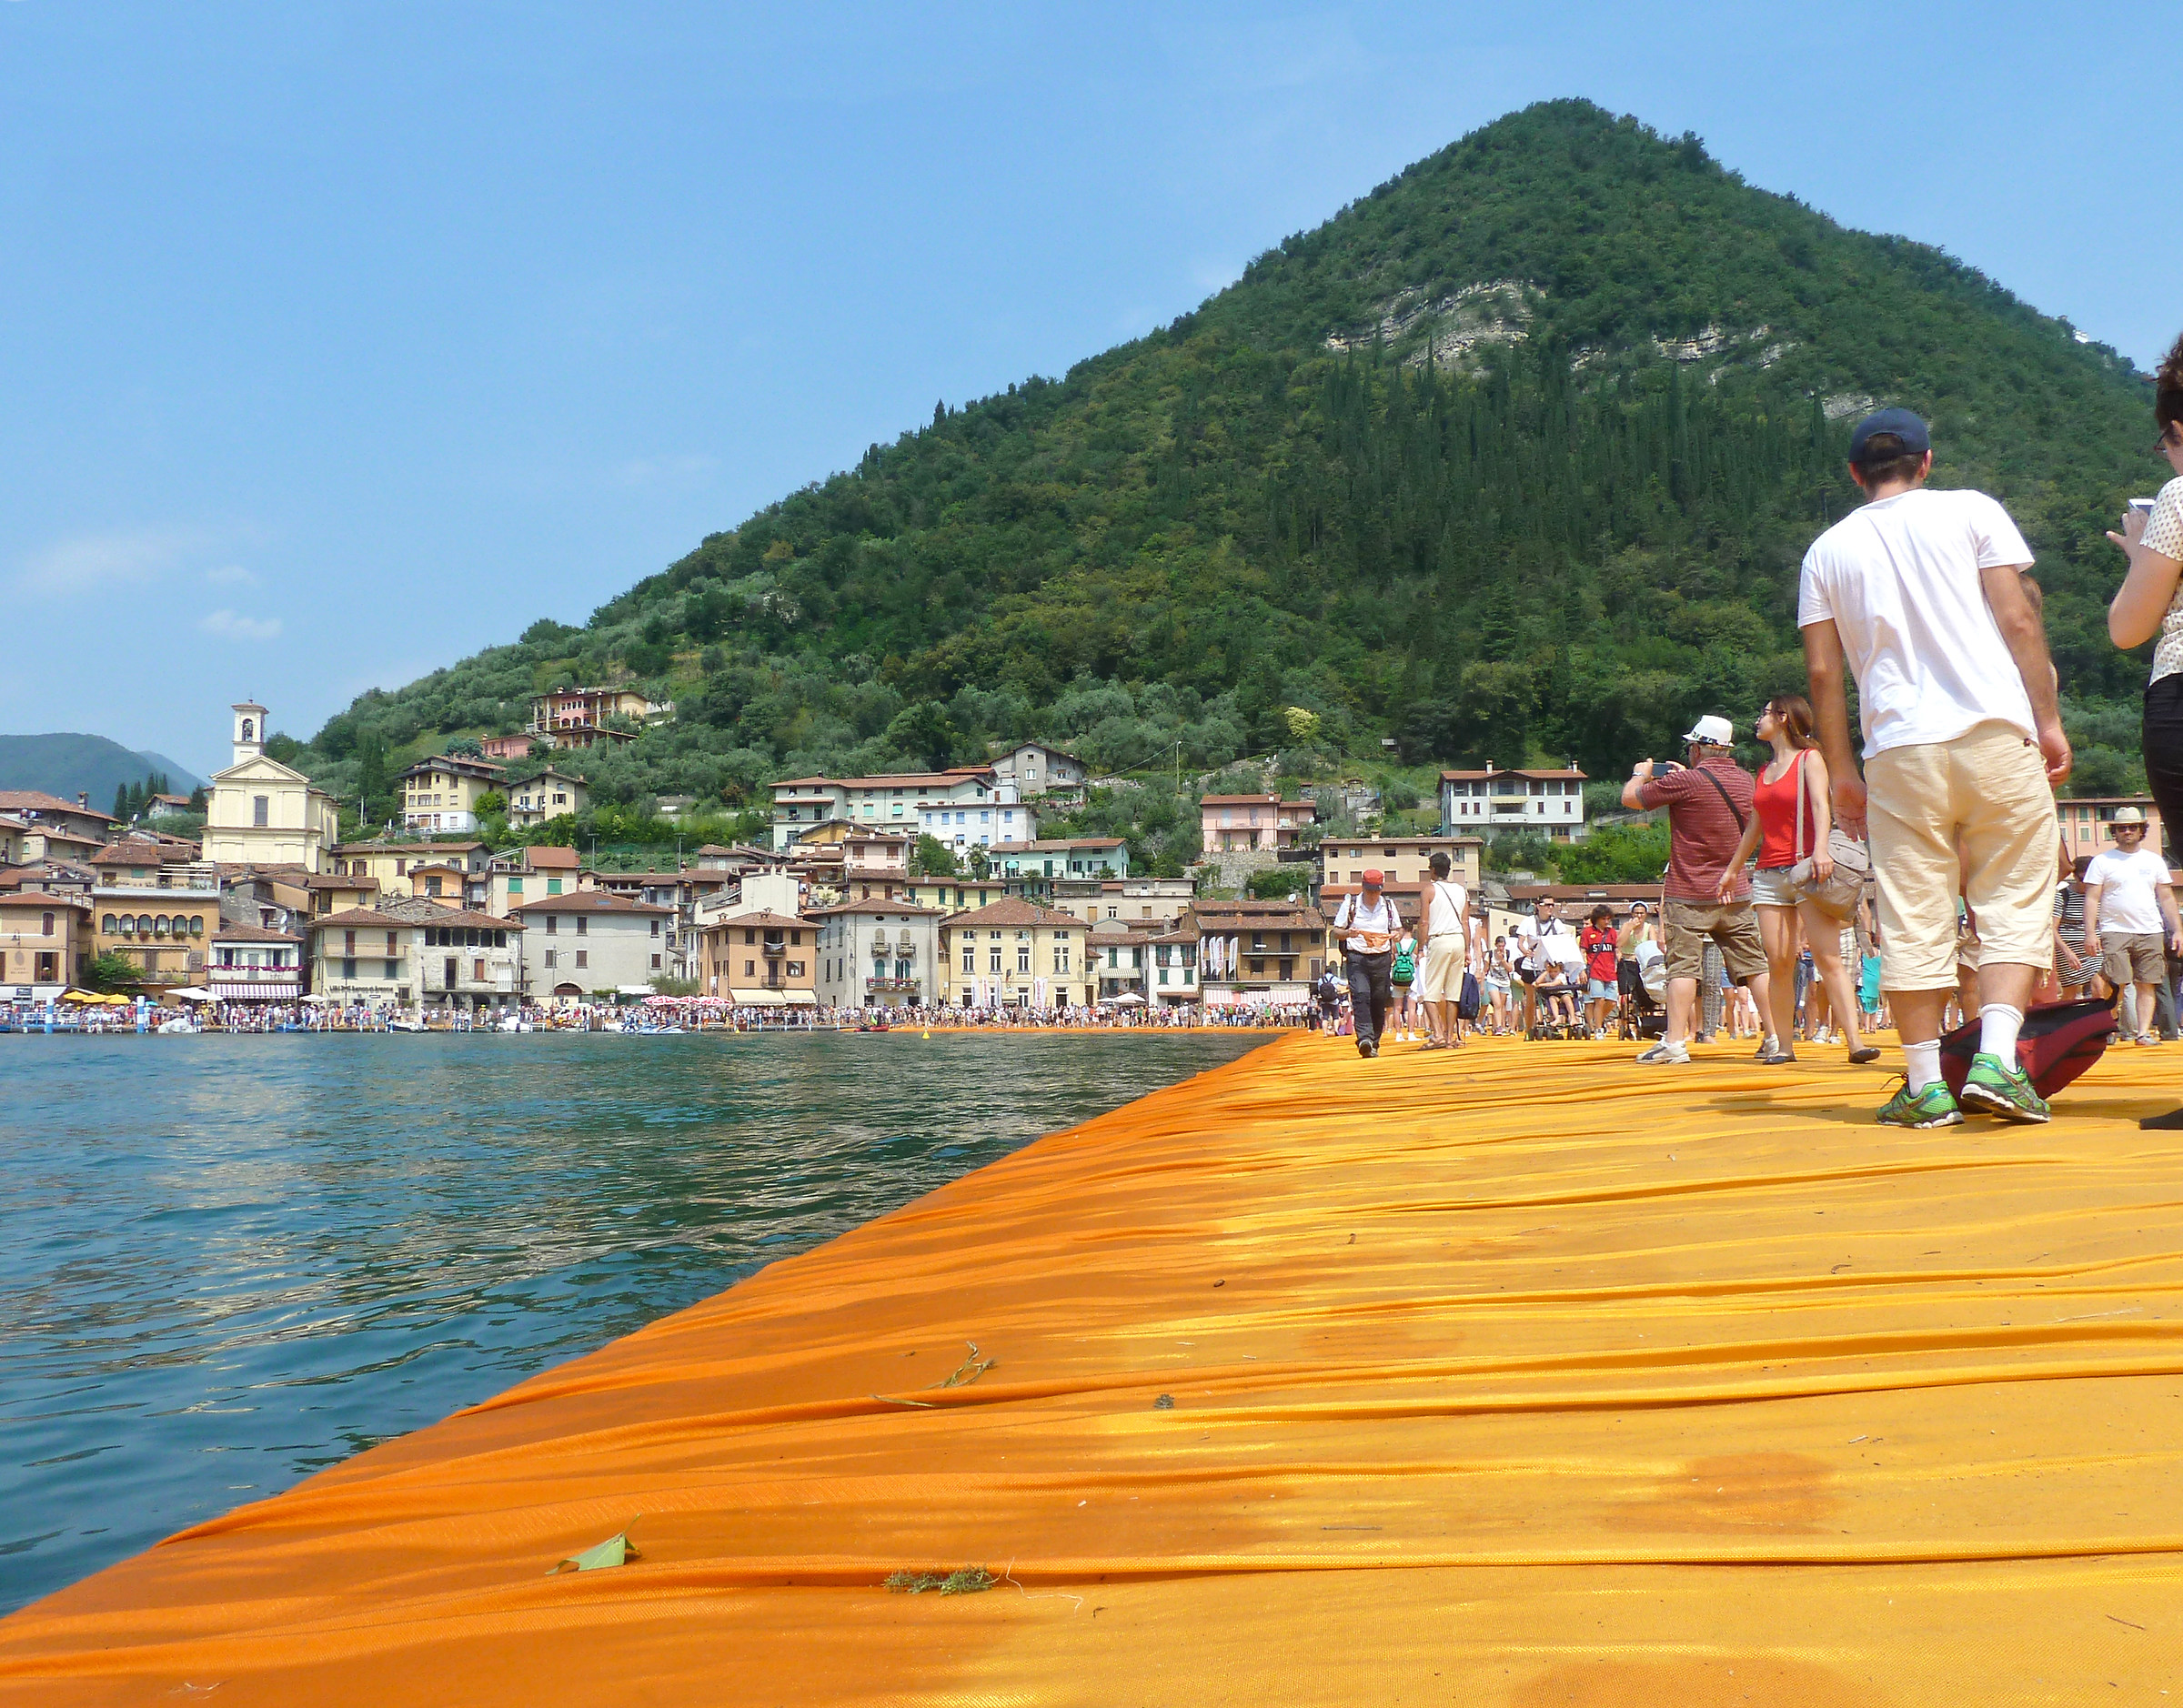 The Floating Piers 30 giugno 2016...